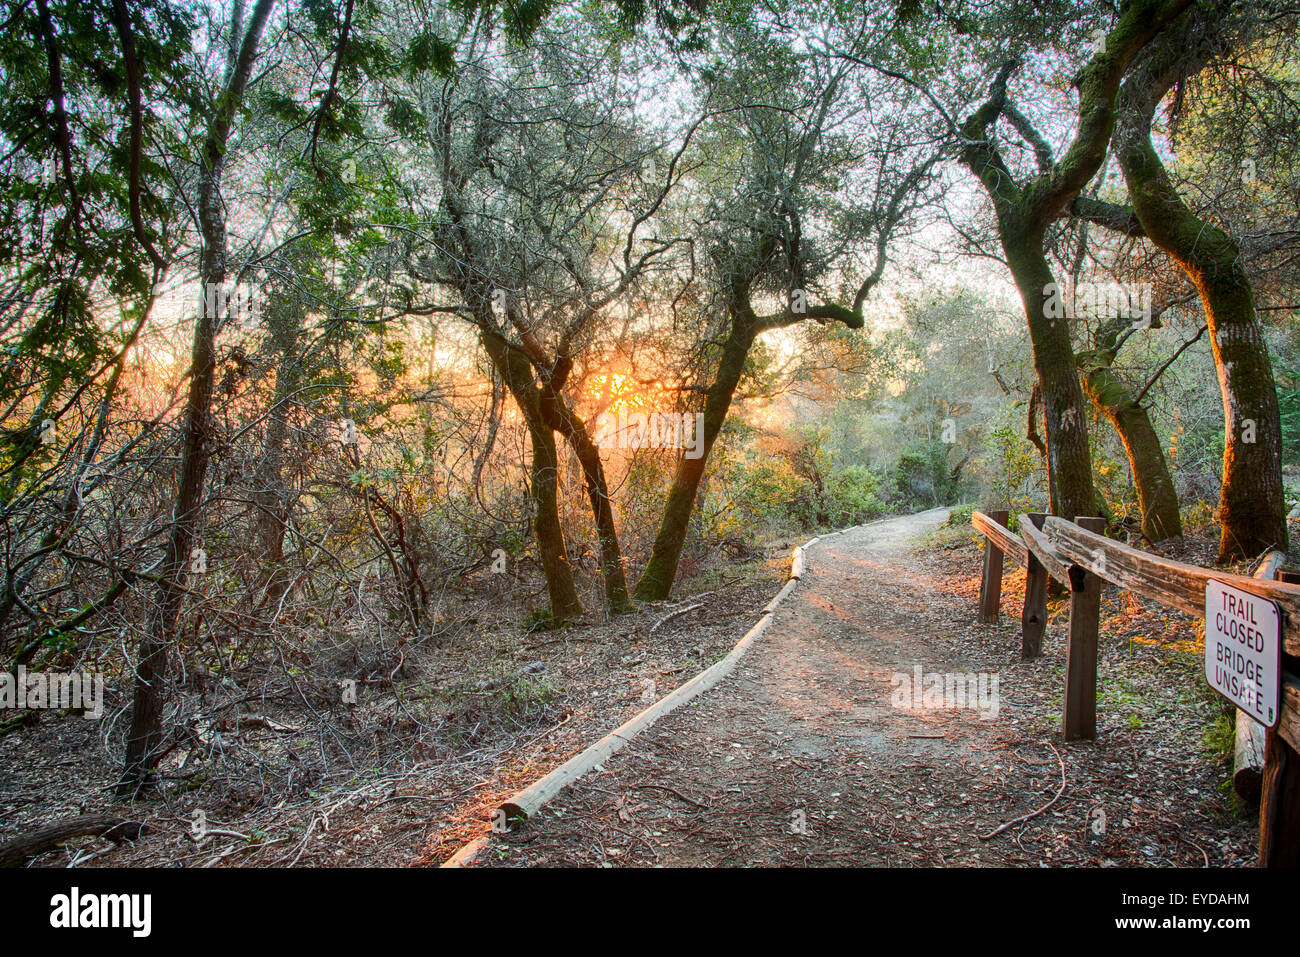 Northern California Landscapes, Sunsets, and Sunrises Stock Photo